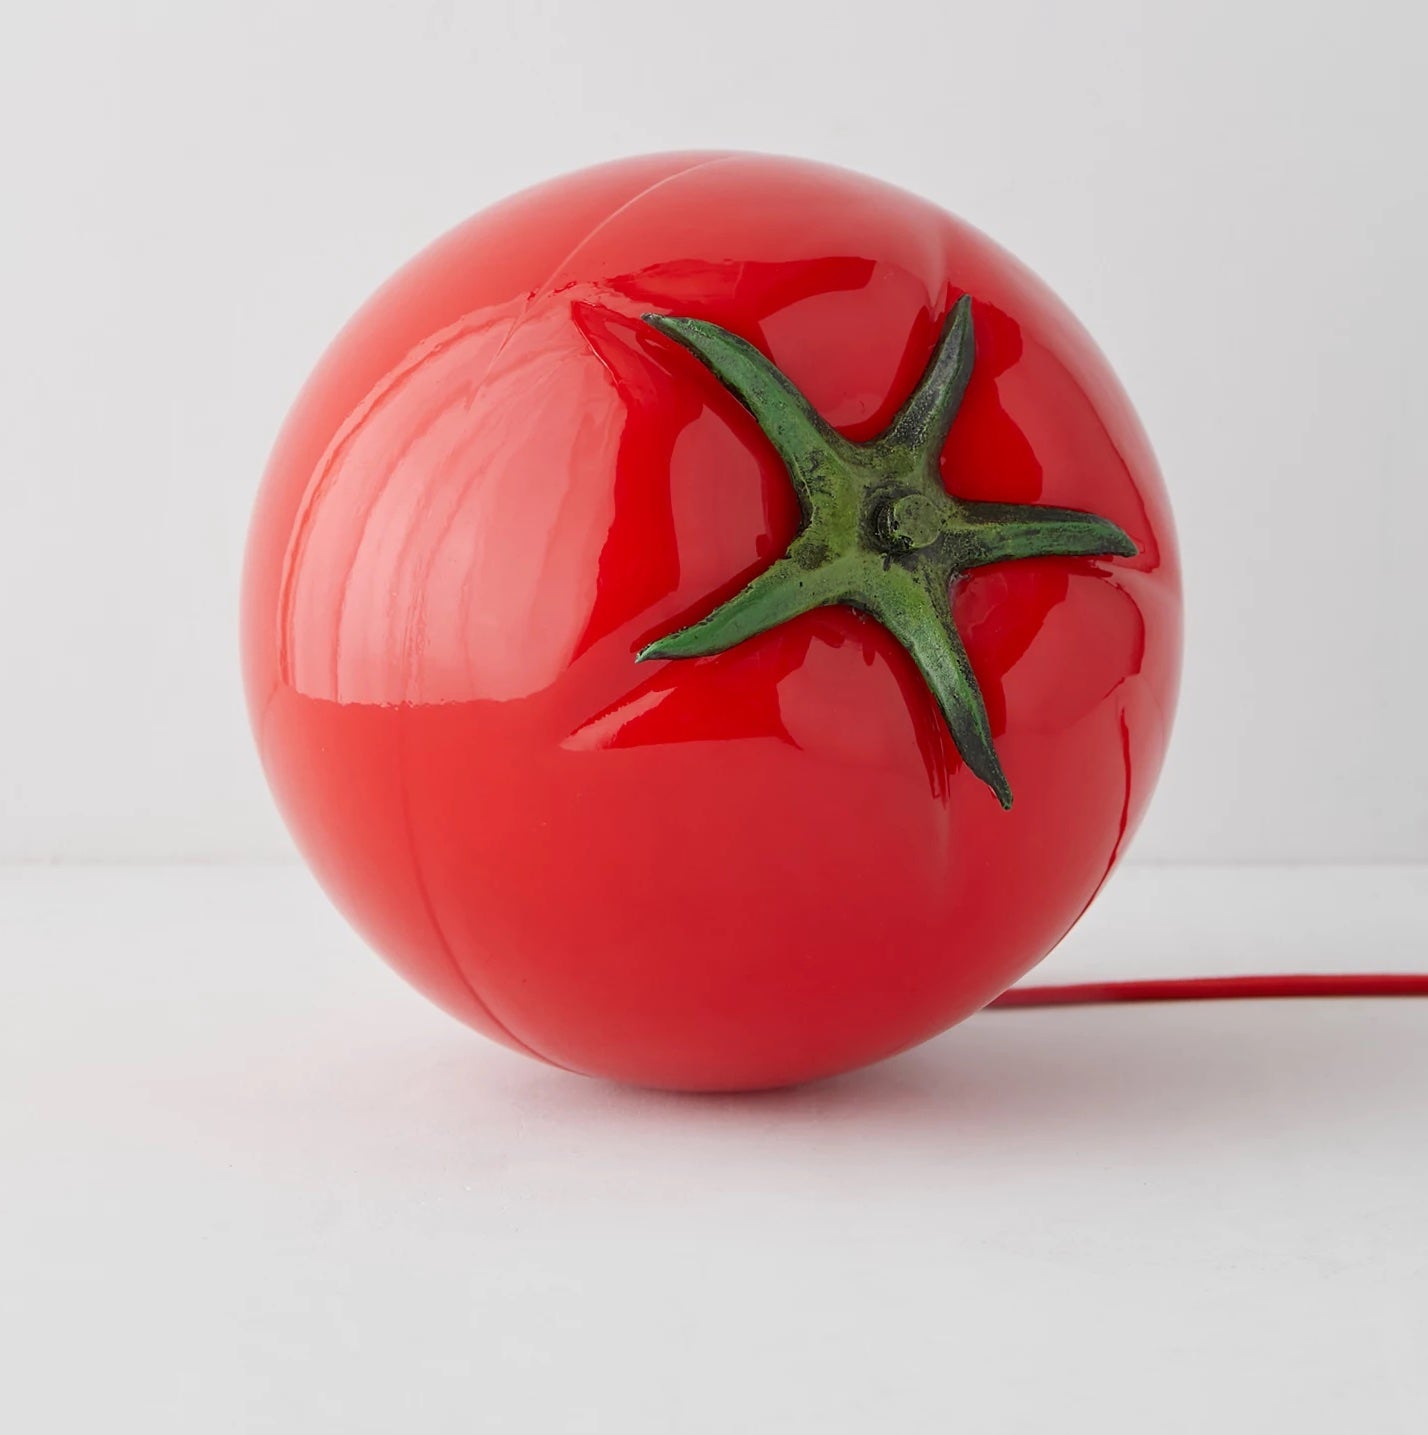 A Tomato-Shaped Lamp, $2 Bodega Glasses, and 16 More of Your Top Buys in August